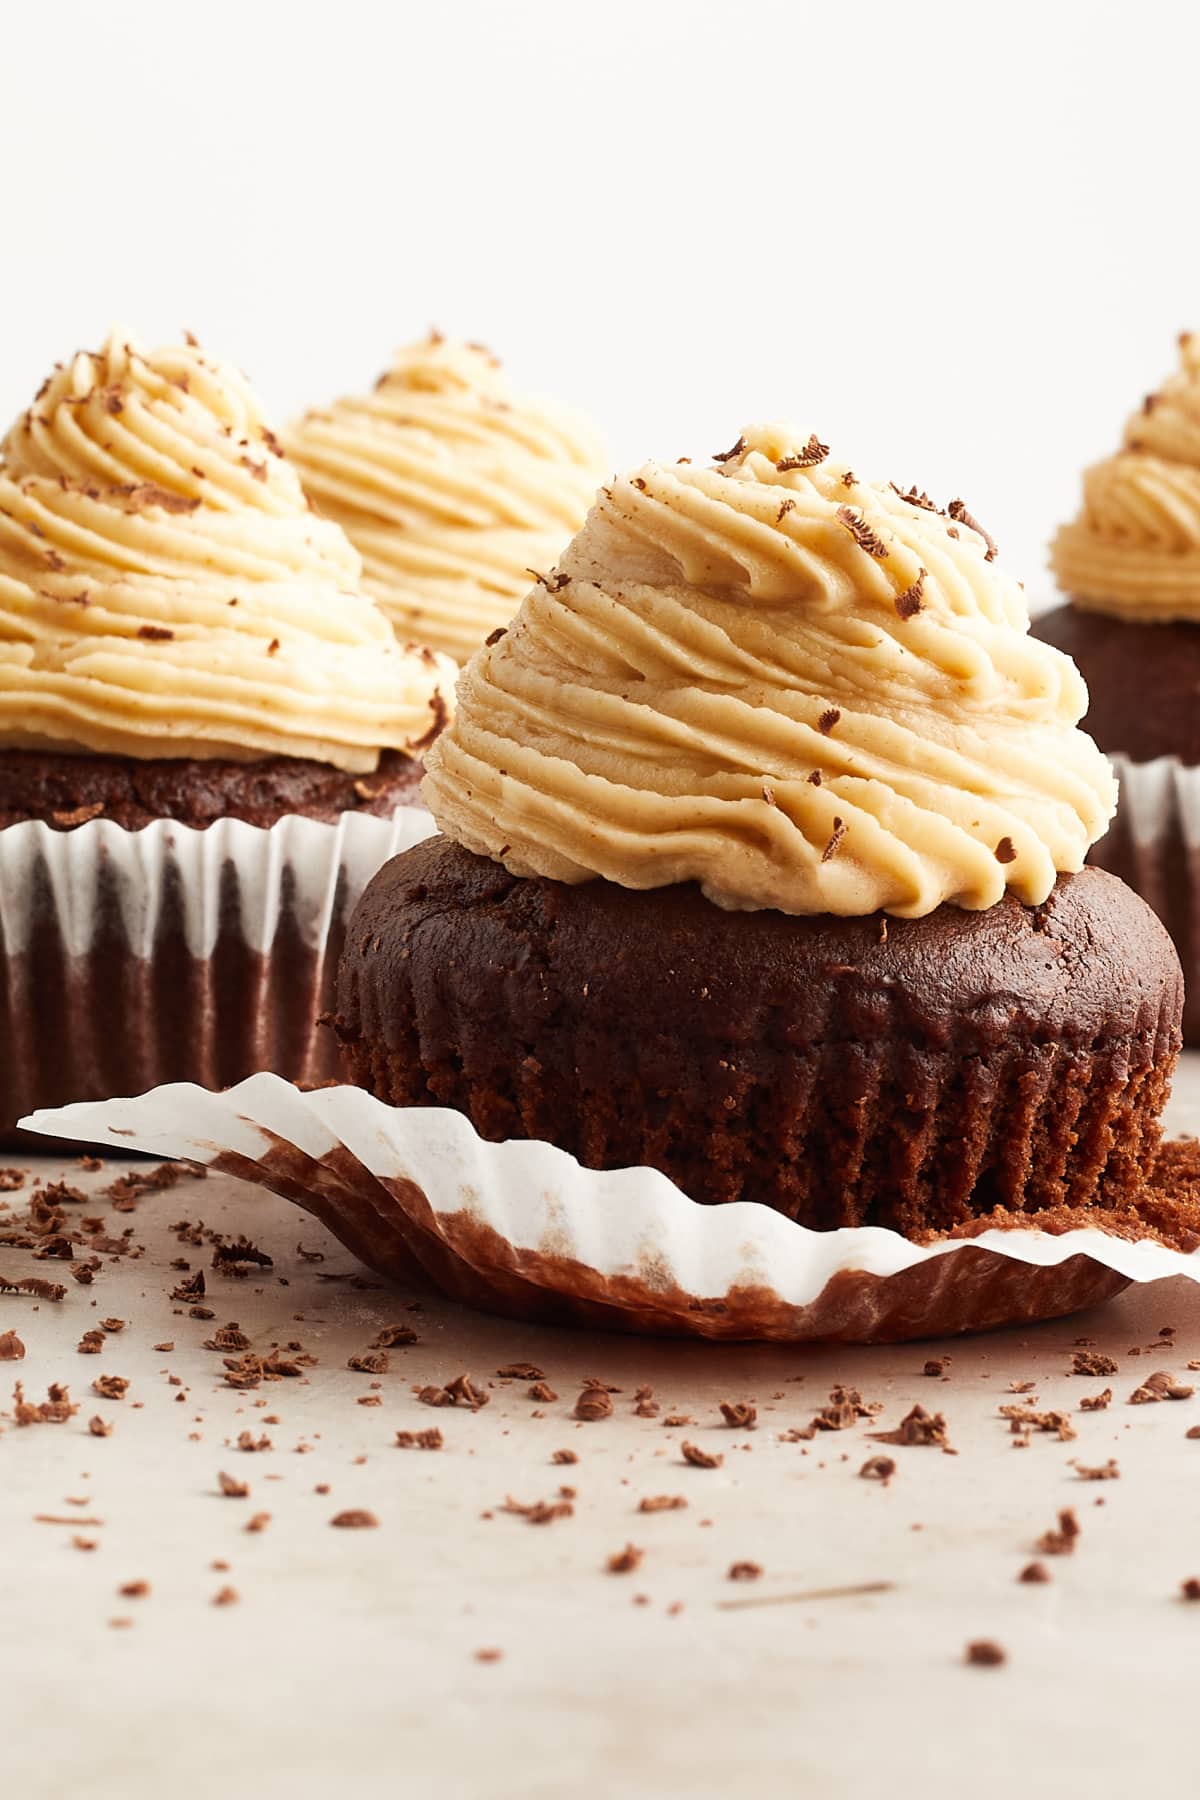 Several chocolate cupcakes with peanut butter frosting piped on top. The cupcake in front has the white paper wrapper partially removed.